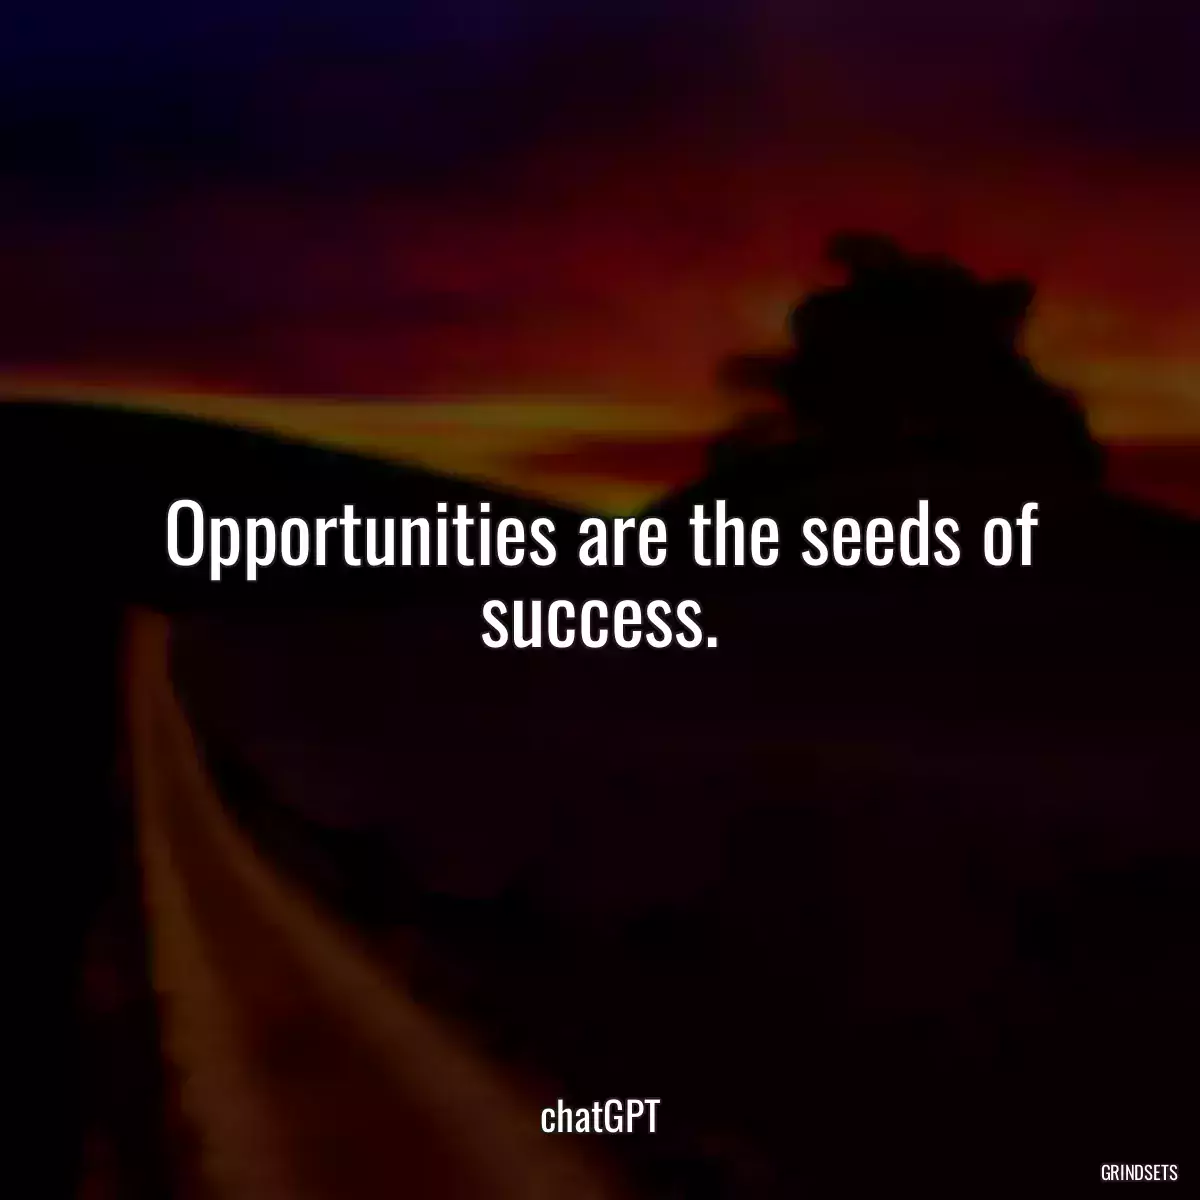 Opportunities are the seeds of success.